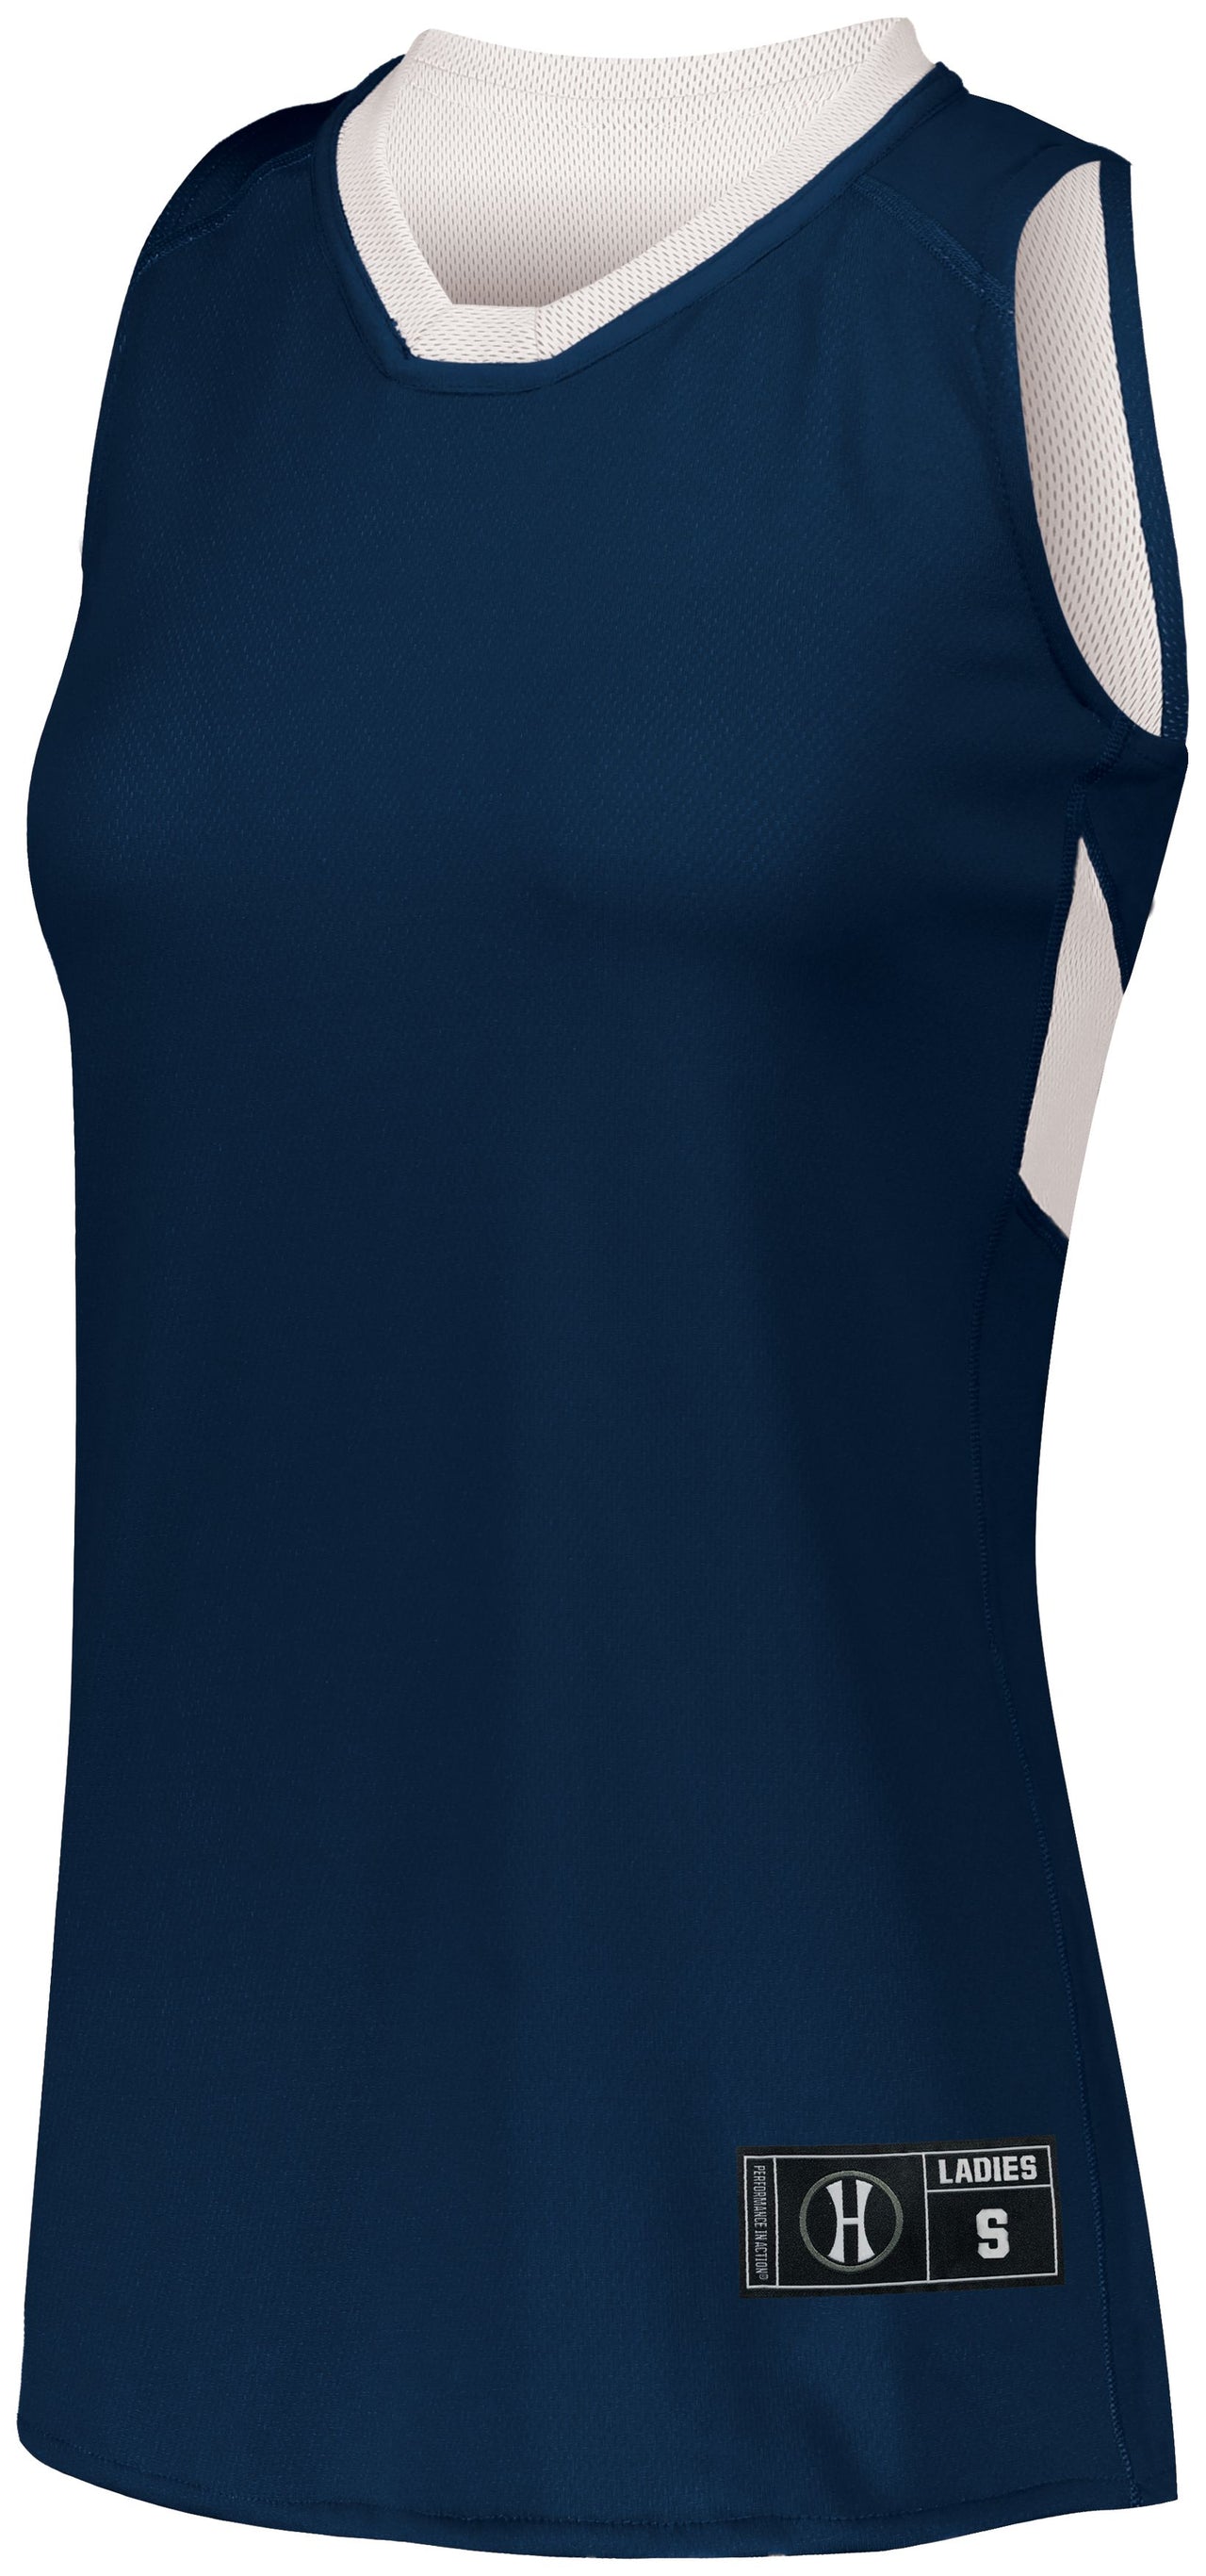 Ladies Dual-Side Single Ply Basketball Jersey - 224378